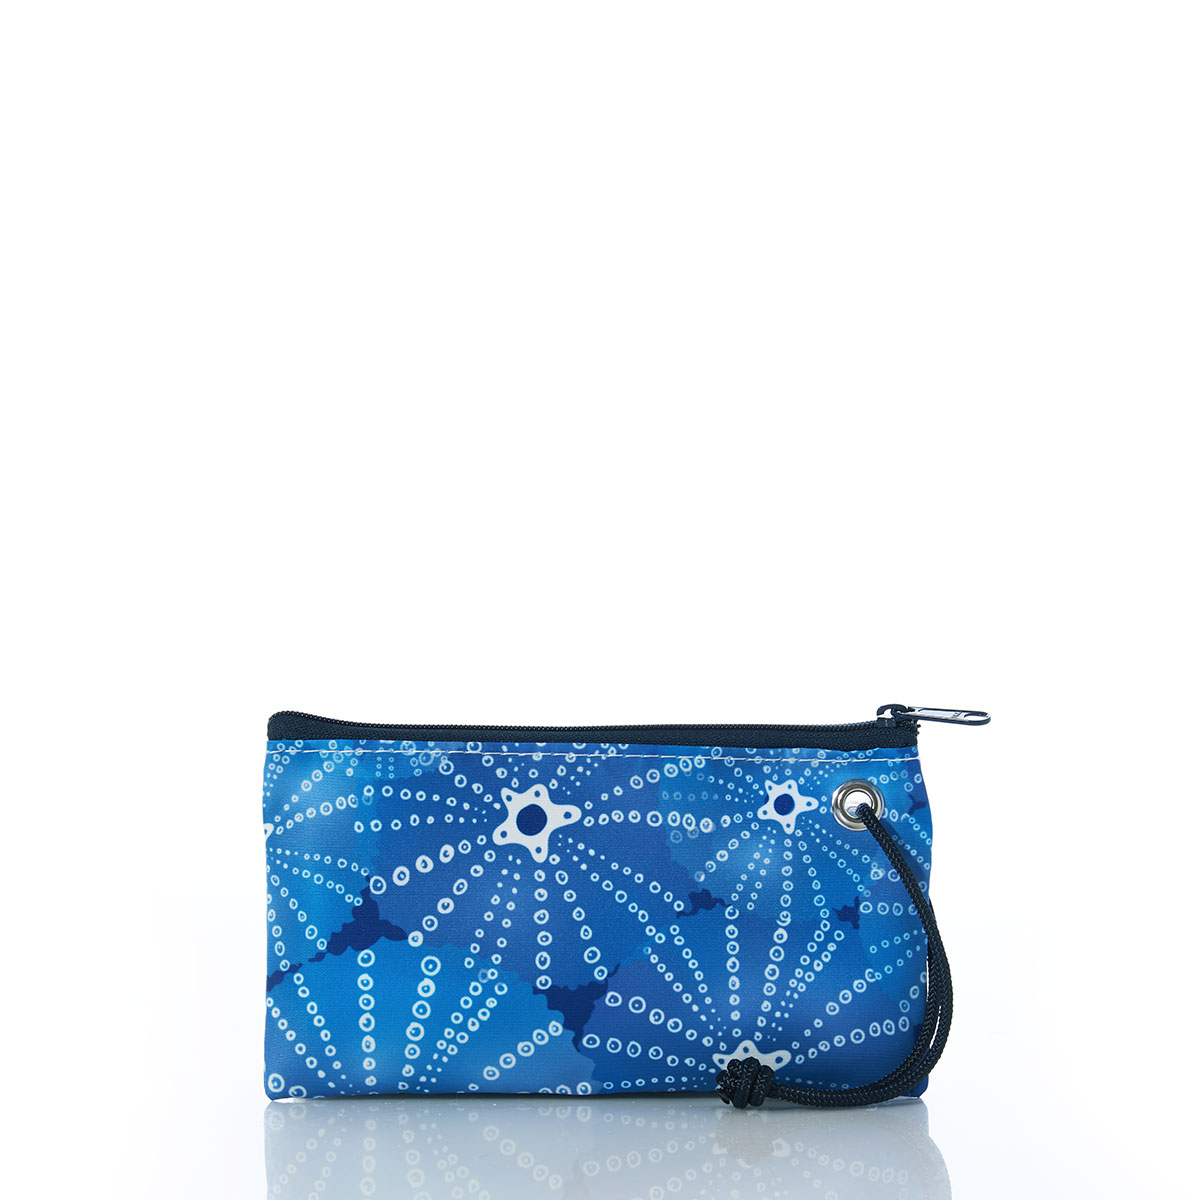 blue sea urchins in an all over print on recycled sail cloth wristlet with navy zipper and wristlet strap